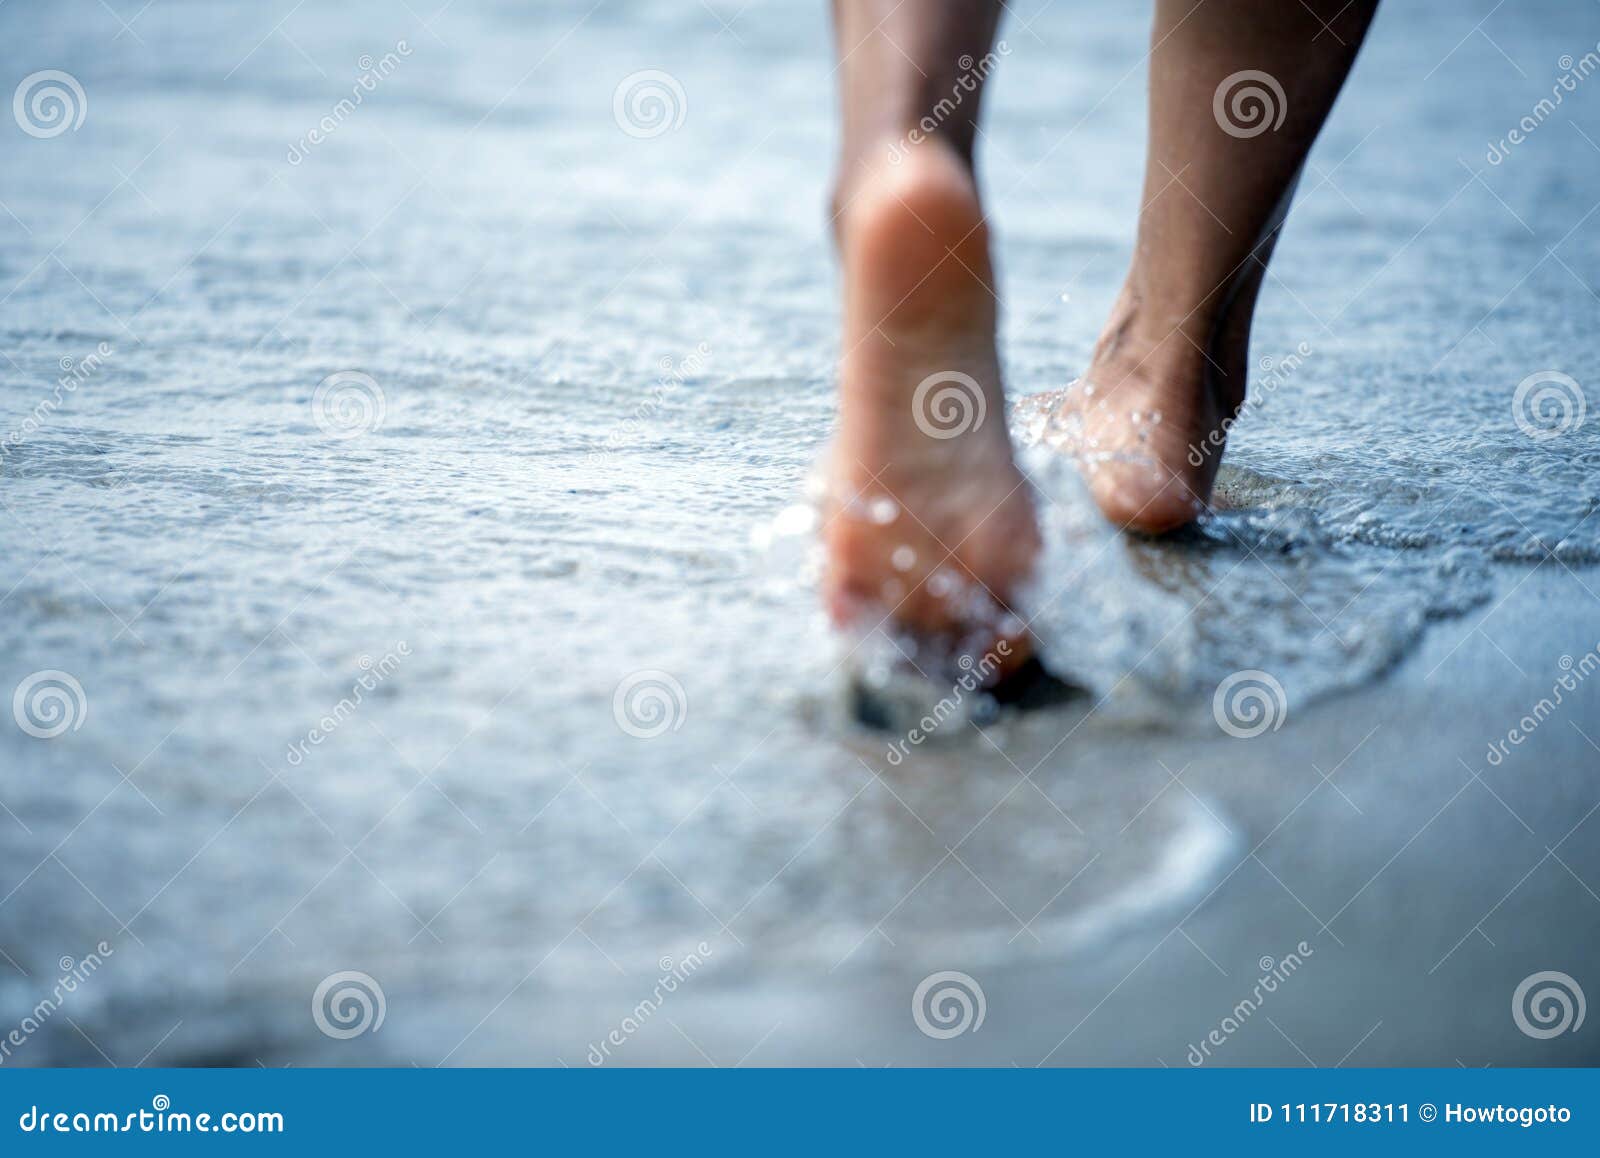 toe woman bare foot walking on the summer beach. close up leg of young woman walking along wave of sea water and sand on the beach